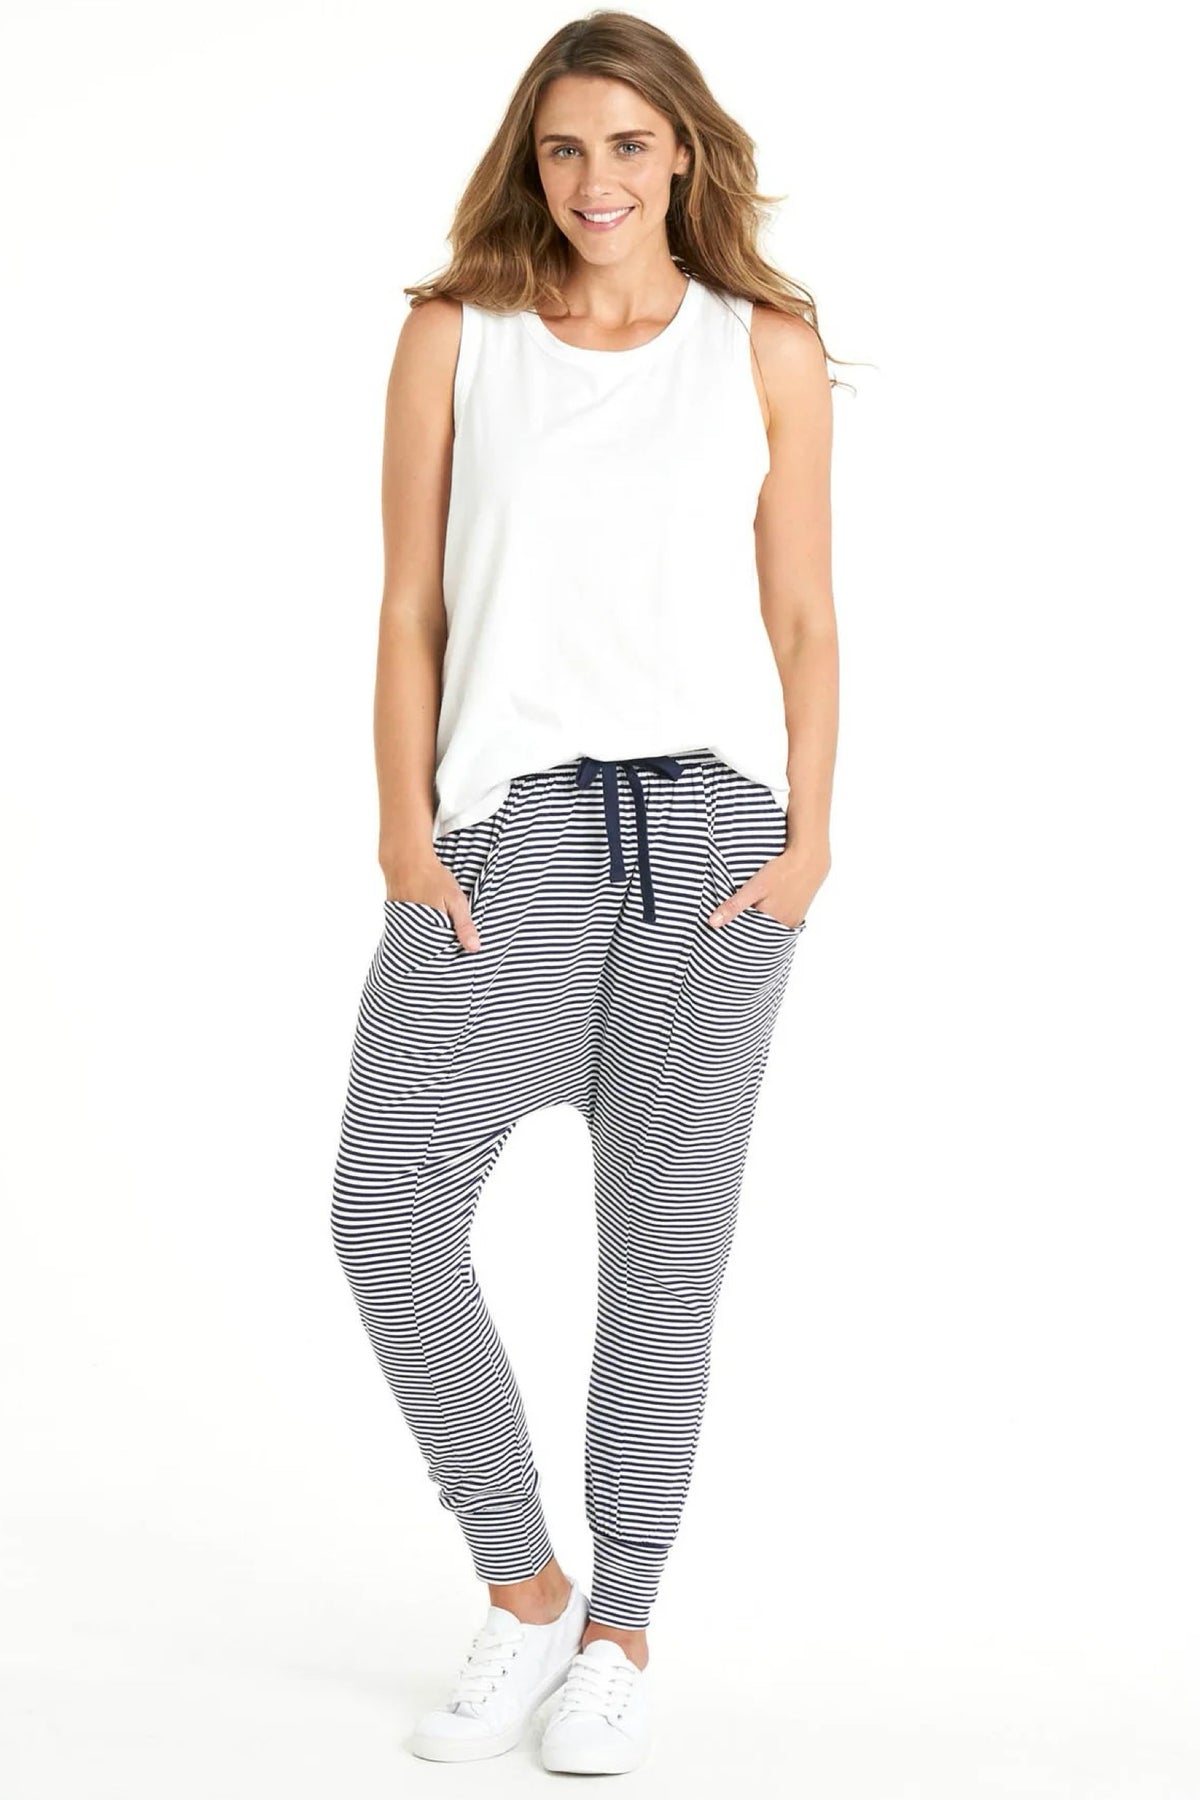 Barcelona Stretchy Relaxed Draped Jogger Pant Navy Blue/White Stripe